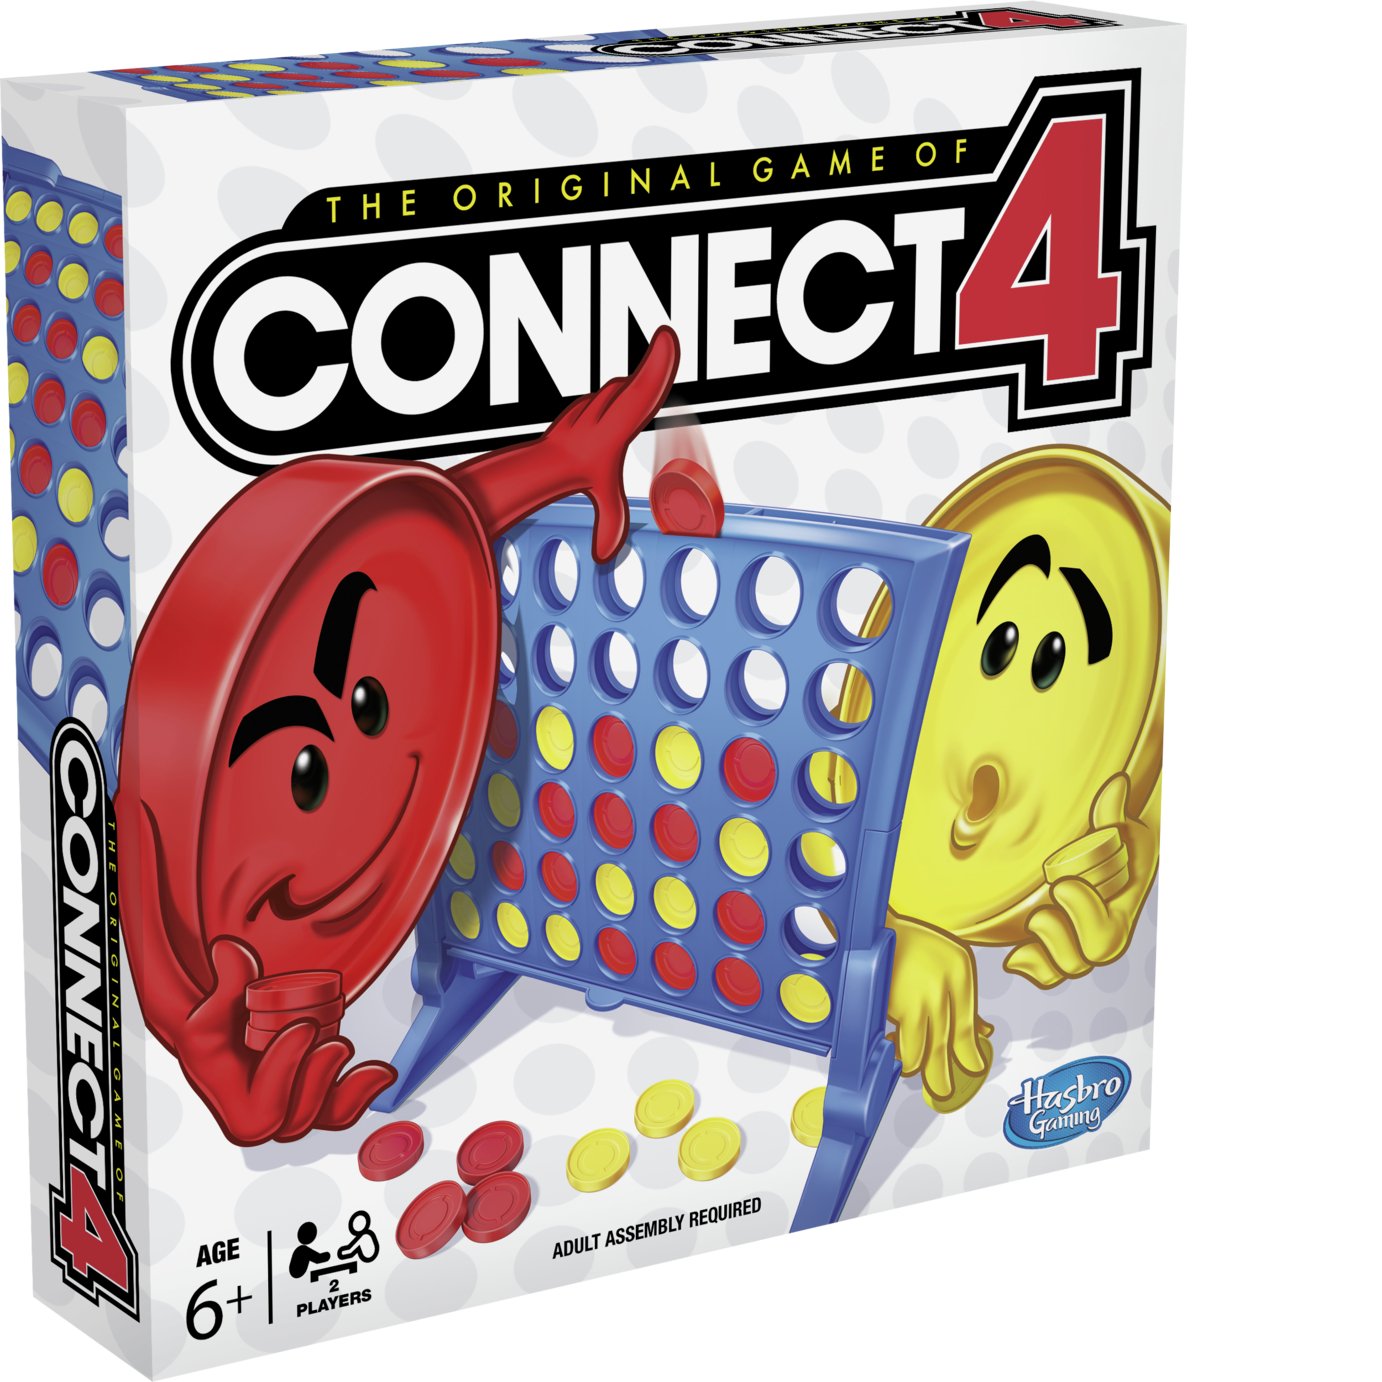 Connect 4 Grid Board Game from Hasbro Gaming